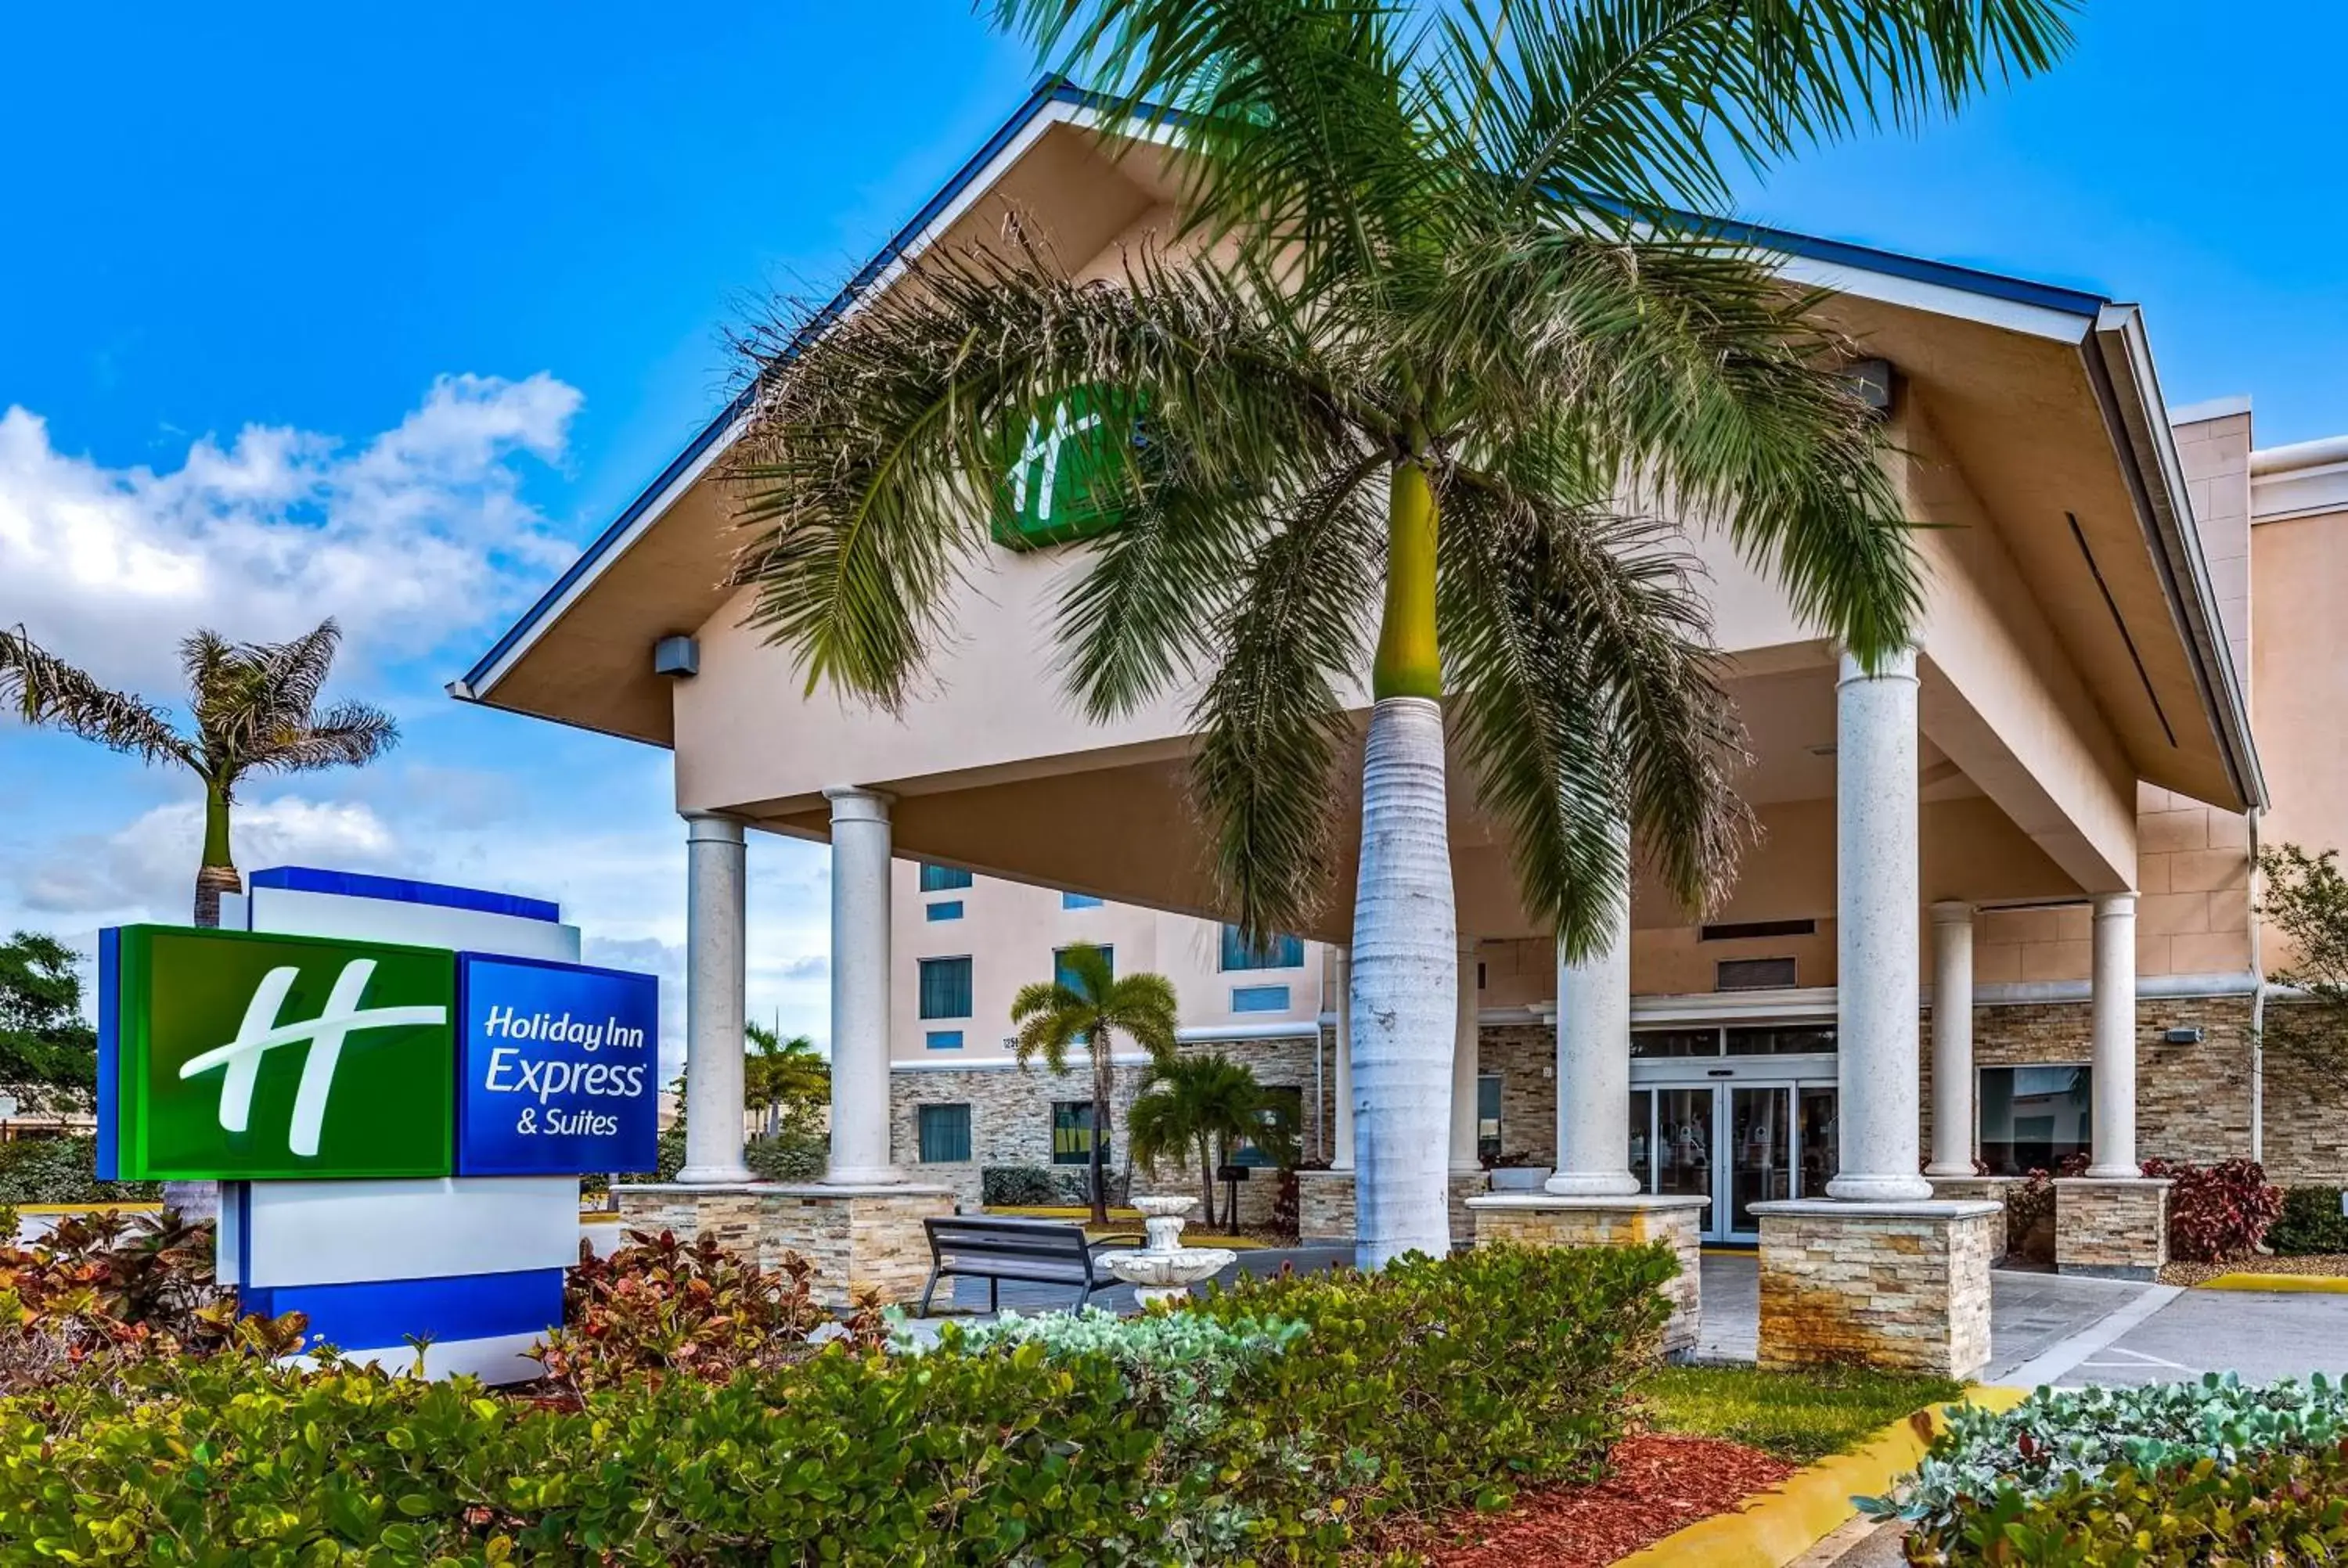 Property Building in Holiday Inn Express & Suites Lantana